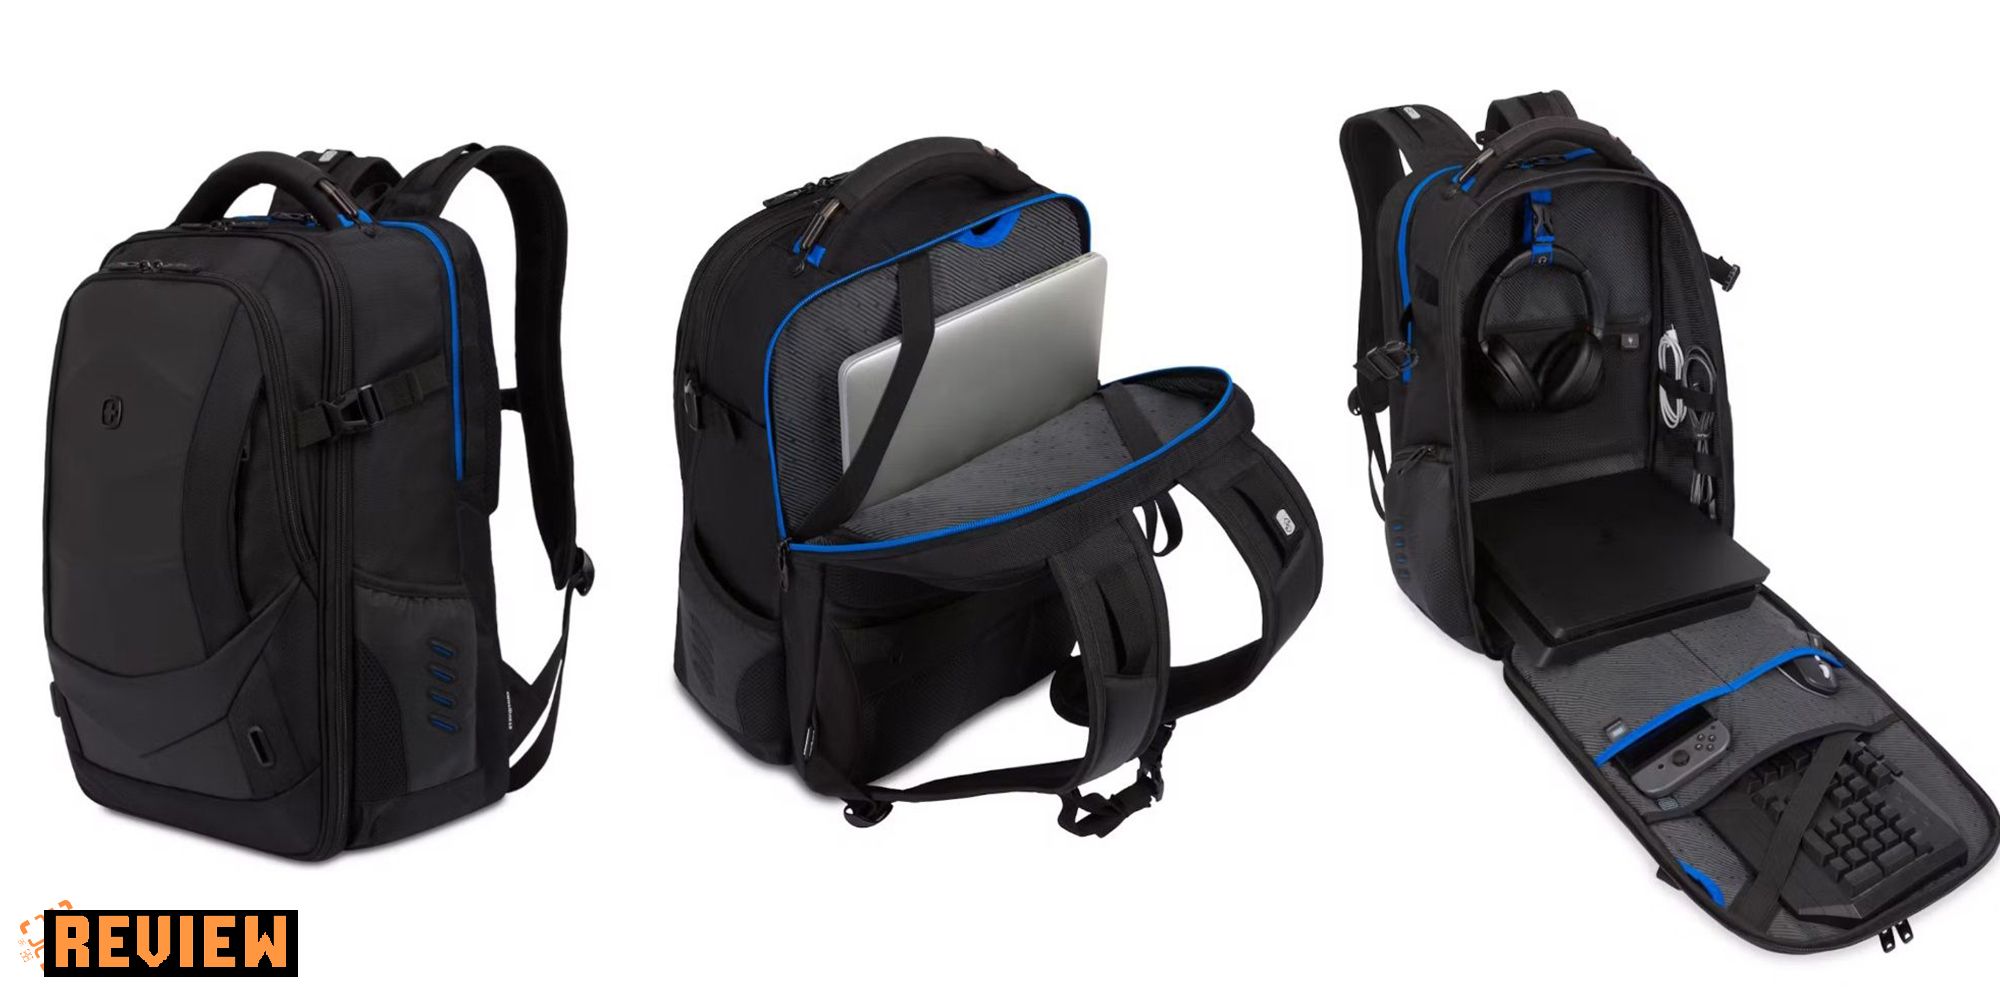 SWISSGEAR 8120 USB Gaming Laptop Backpack Review